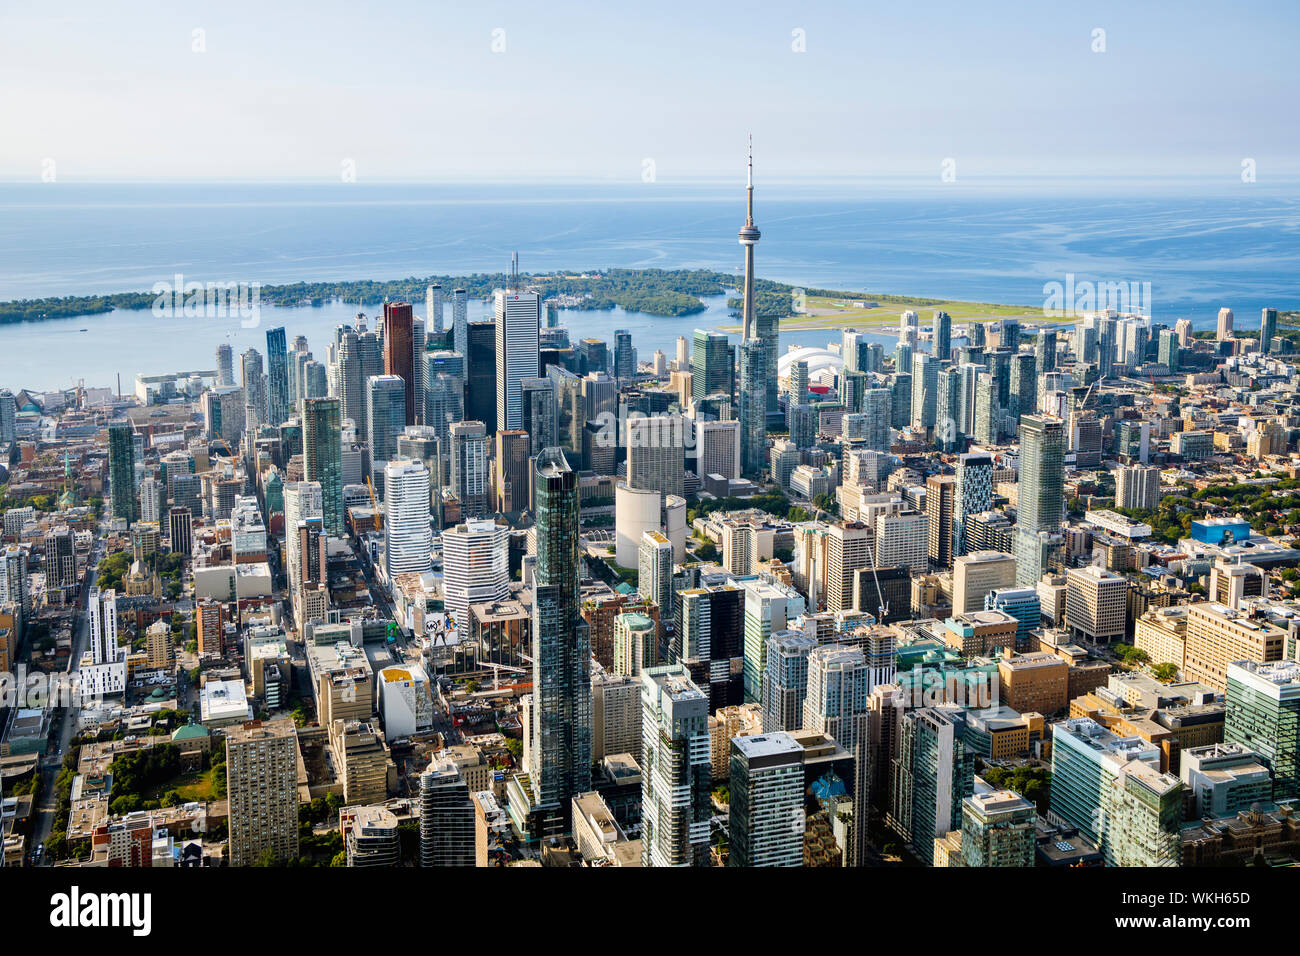 An aerial view of downtown Toronto skyline from the north looking south toward the business district and the Toronto Islands. Stock Photo